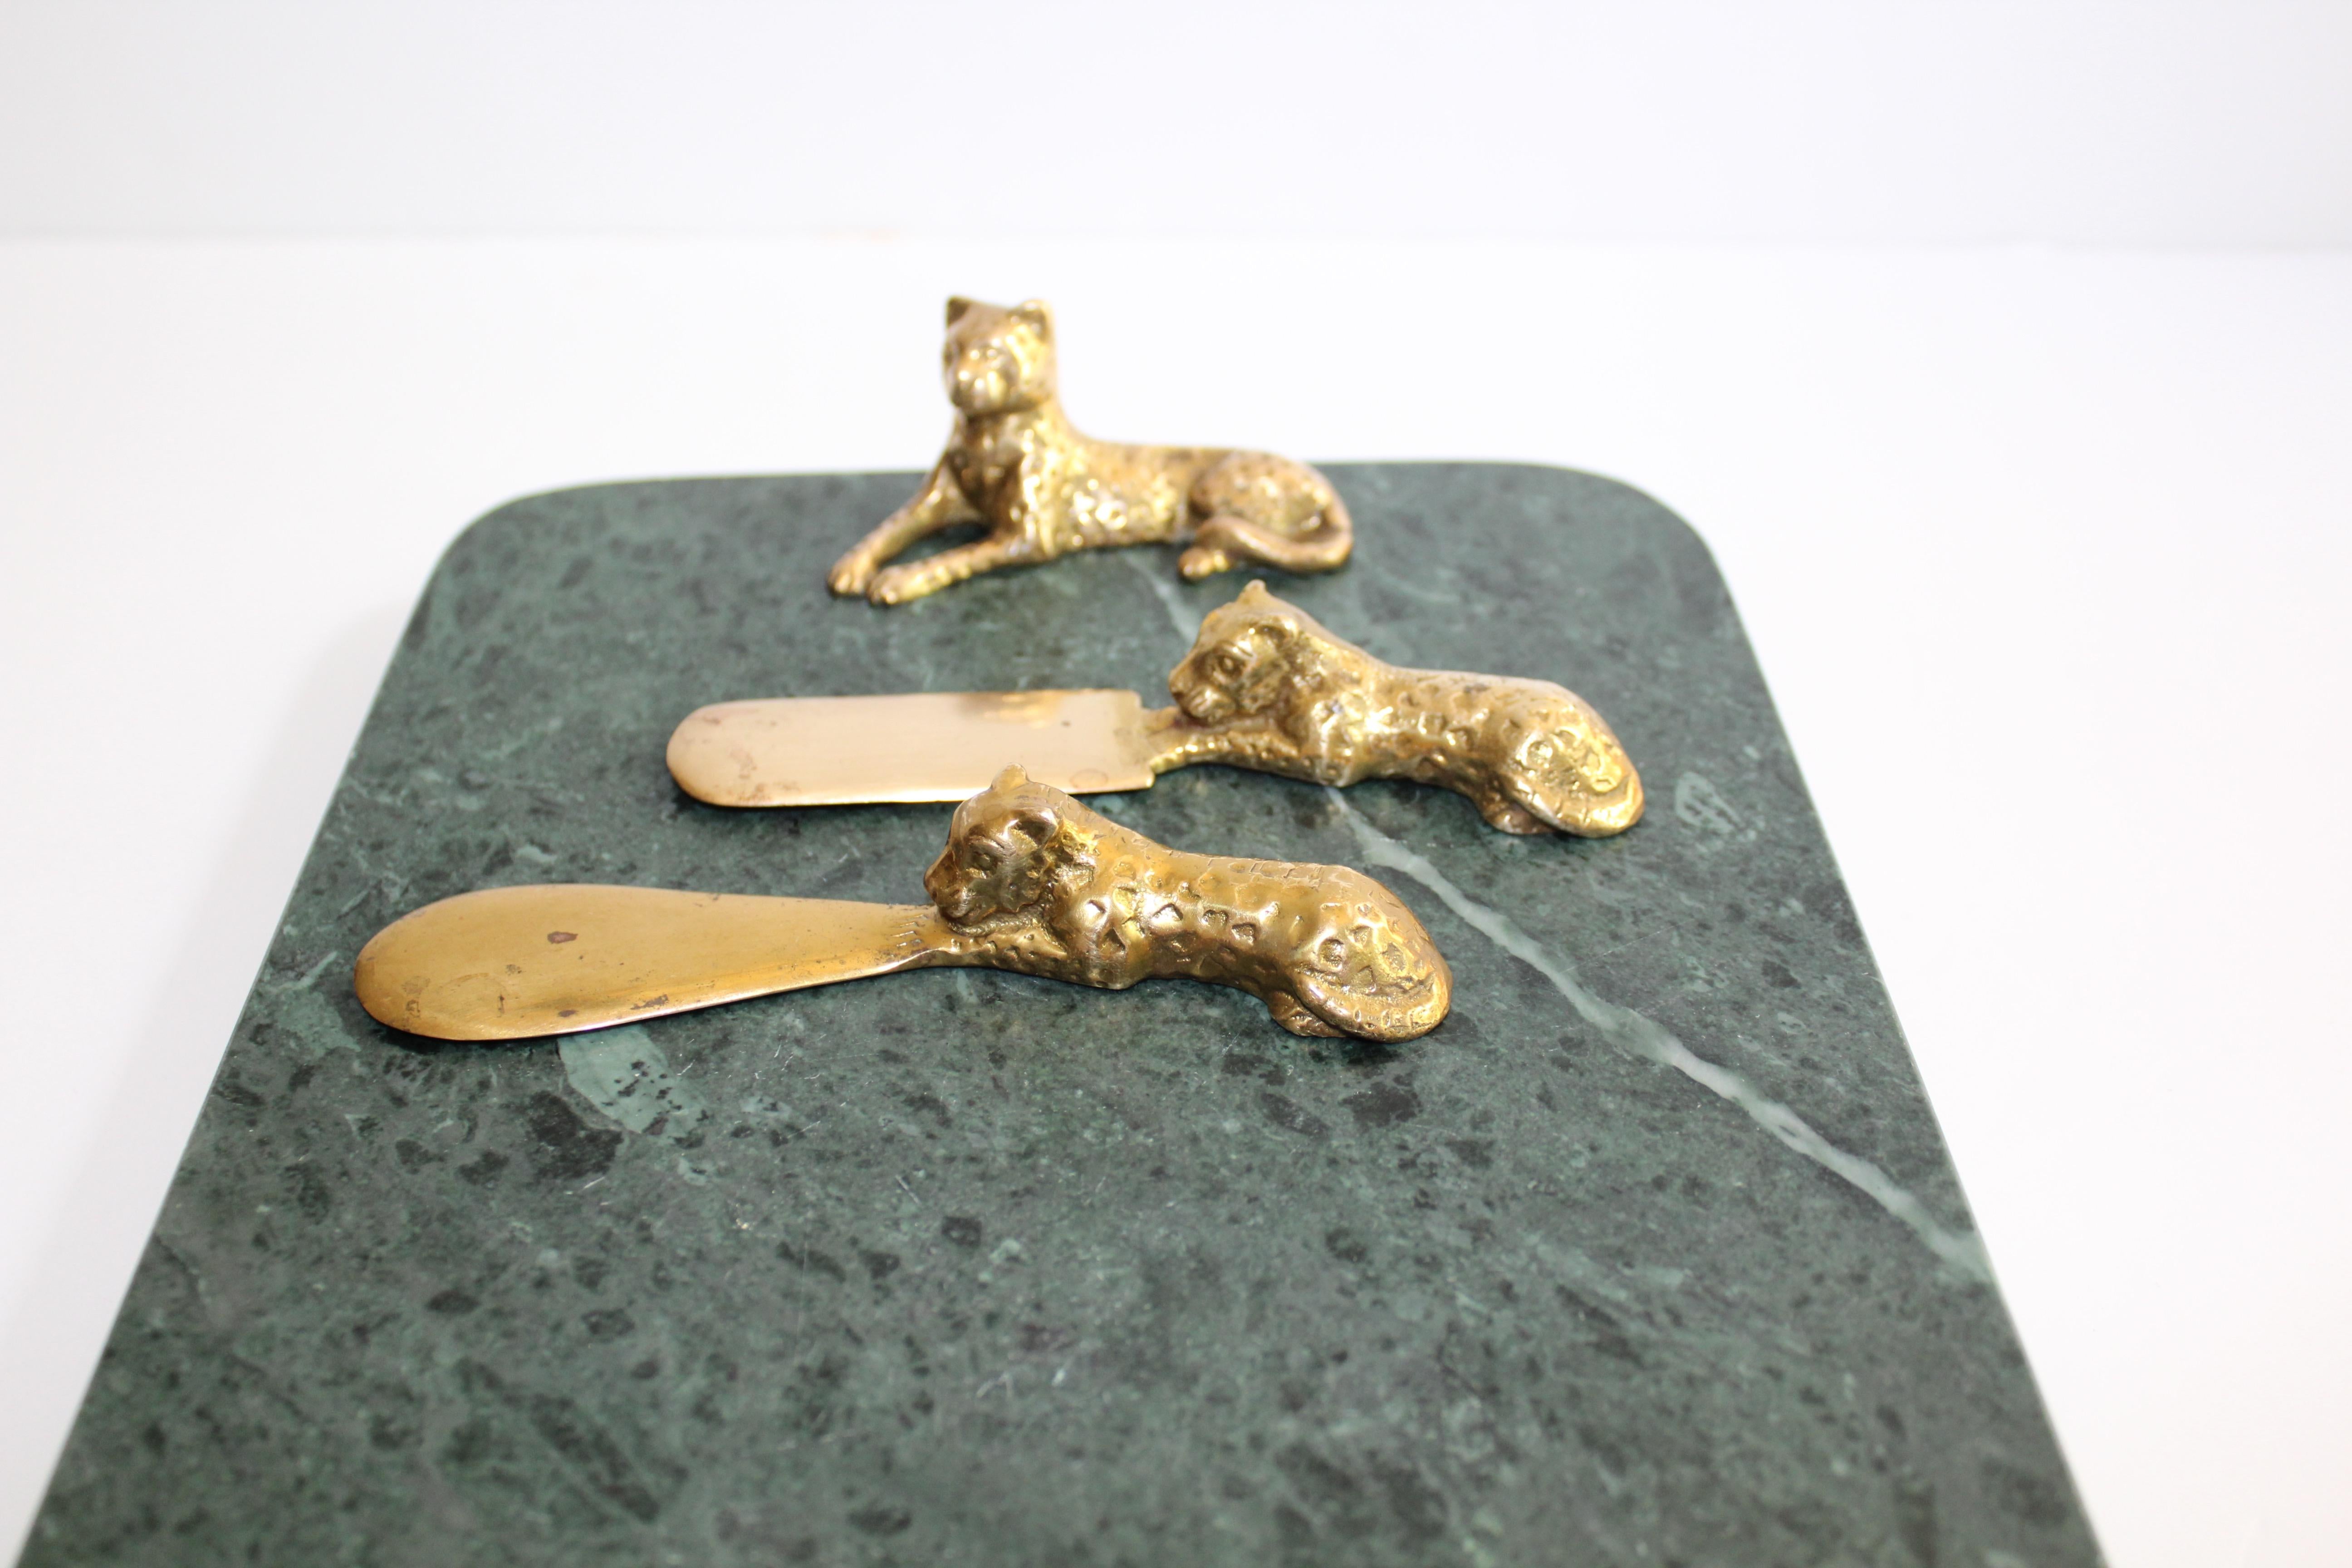 Hollywood Regency Vintage Green Marble Tray with Gold Leopard Serving Knives, 1970s